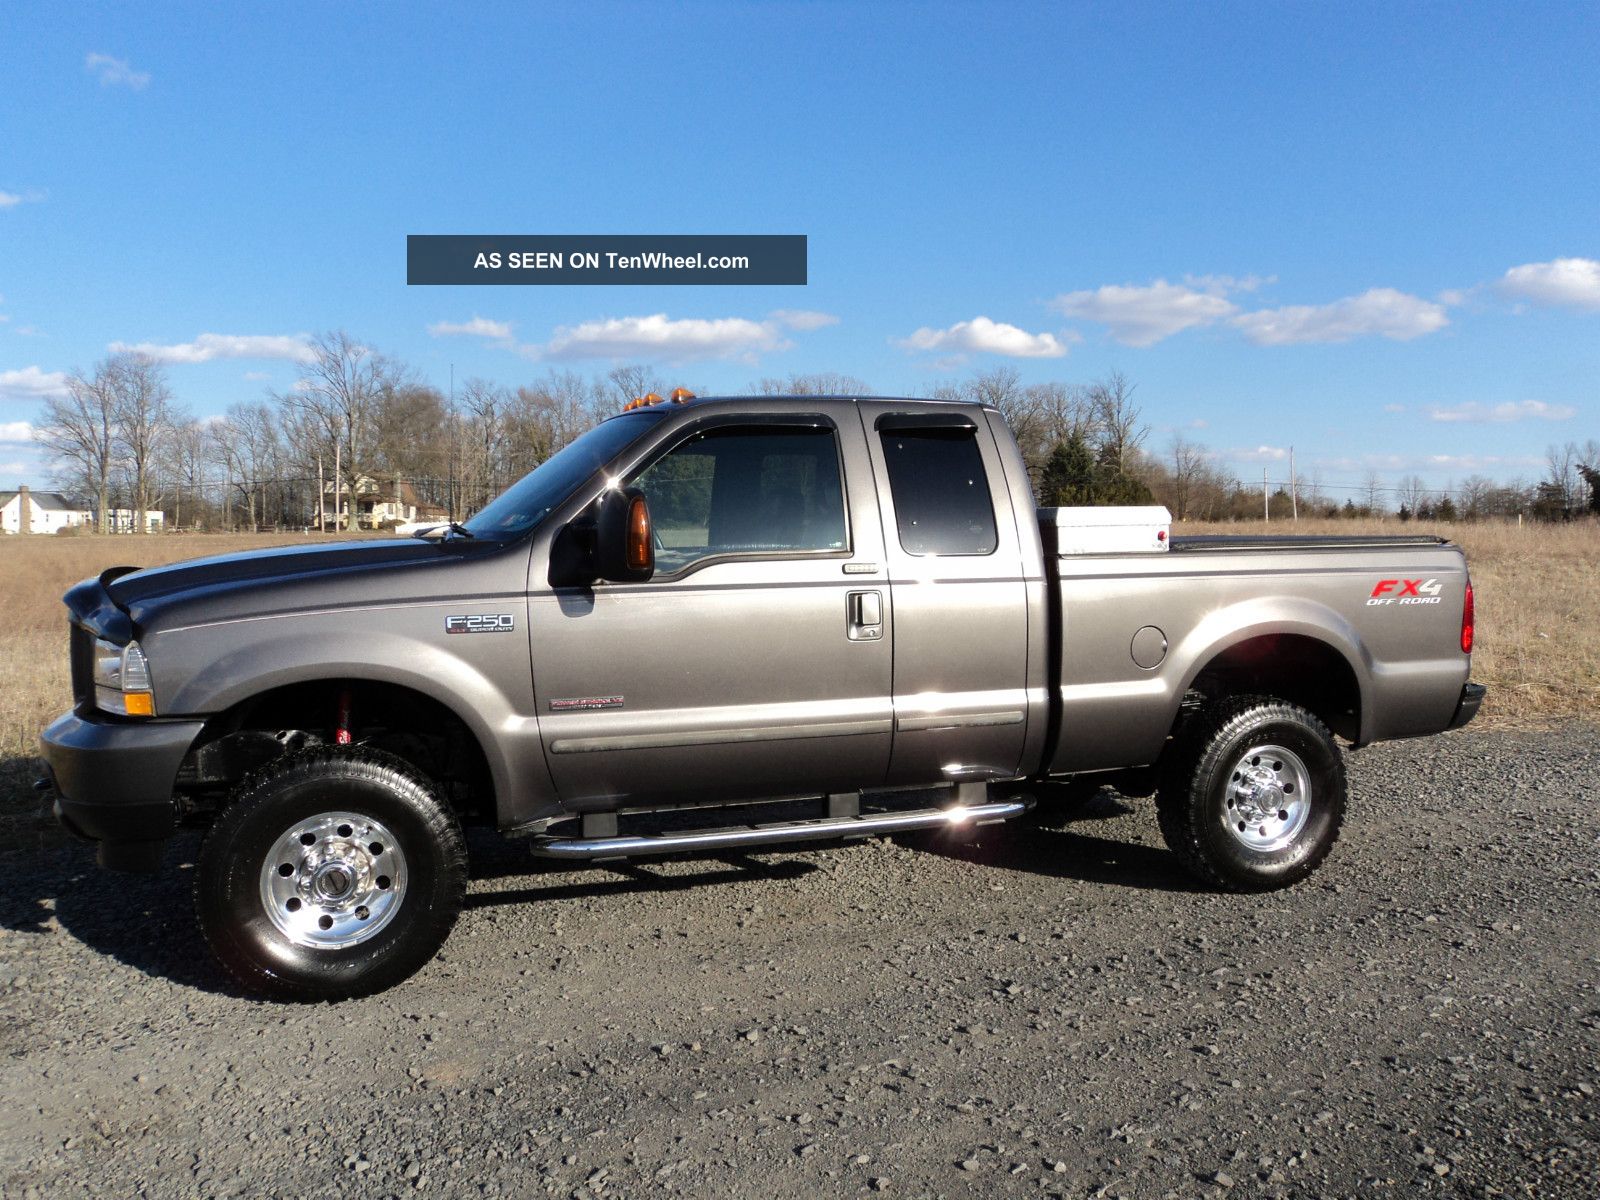 2003 Ford F250 Powerstroke Diesel Fx4 Ext Cab 4x4 16900 Offer